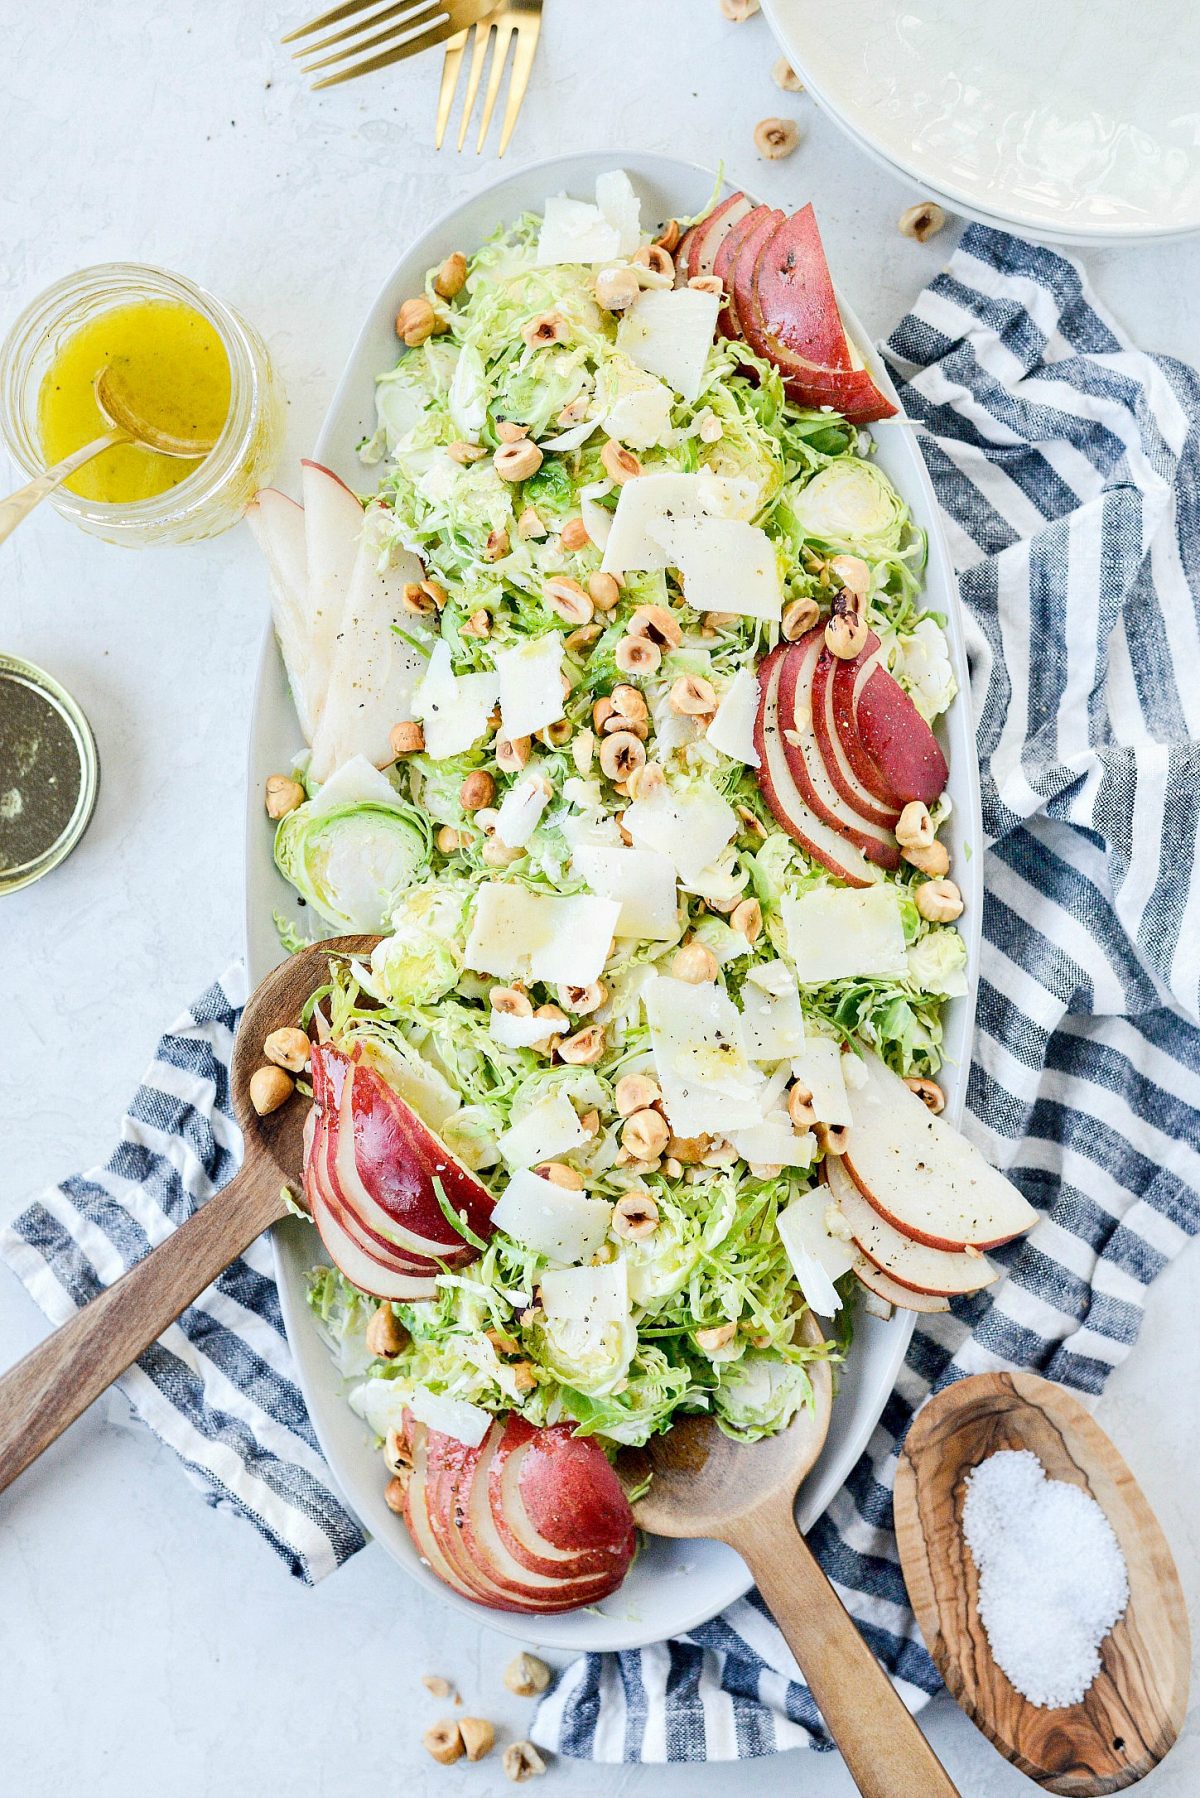 Shaved-Brussels-Sprout-Salad-with-Pear-Parmesan-and-Hazelnuts-l-SimplyScratch.com-21